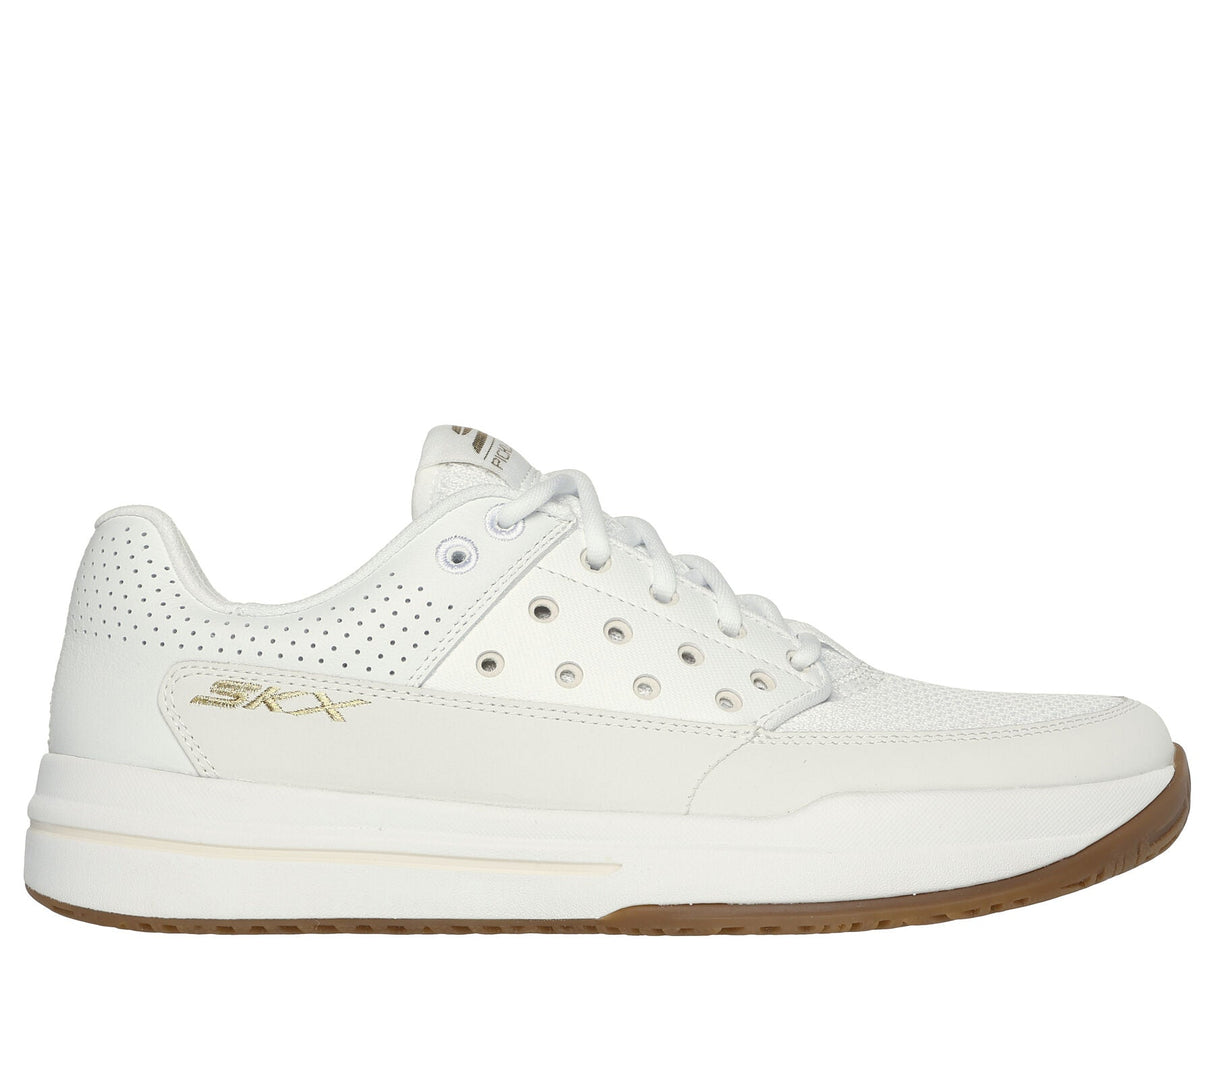 Skechers Women's Court Luxe Pickleball - A&M Clothing & Shoes